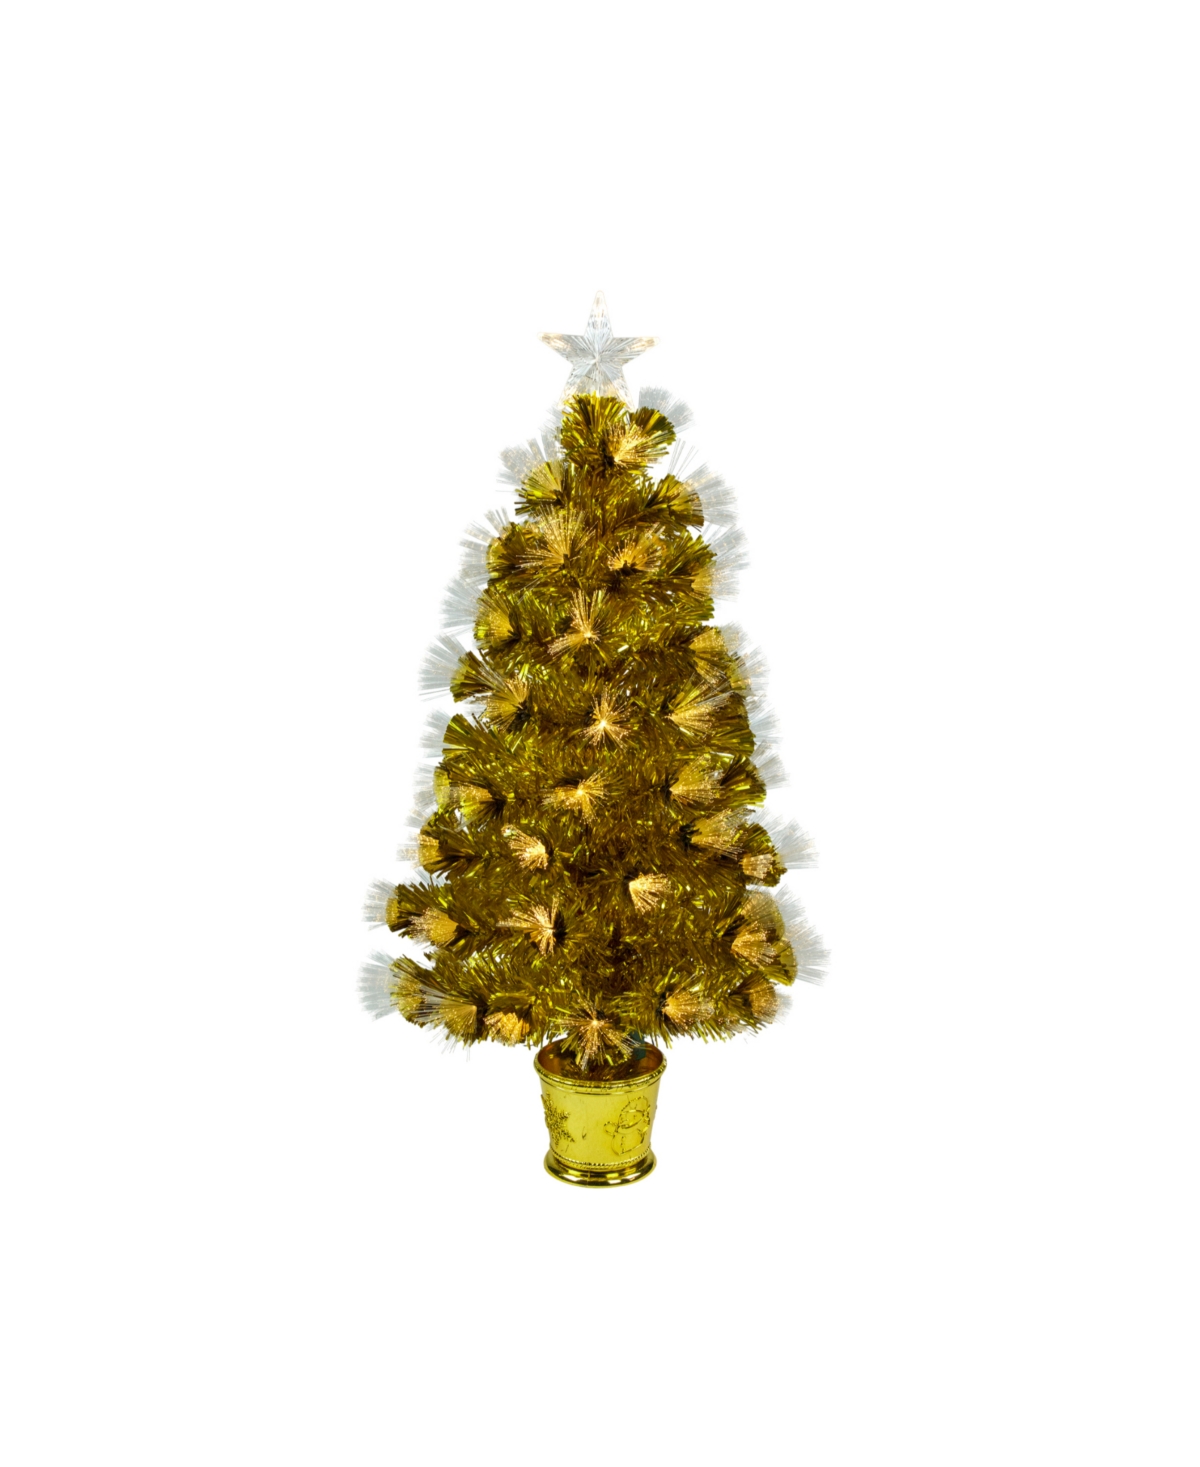 3' Pre-Lit Fiber Optic Artificial Christmas Tree with Lights - Gold